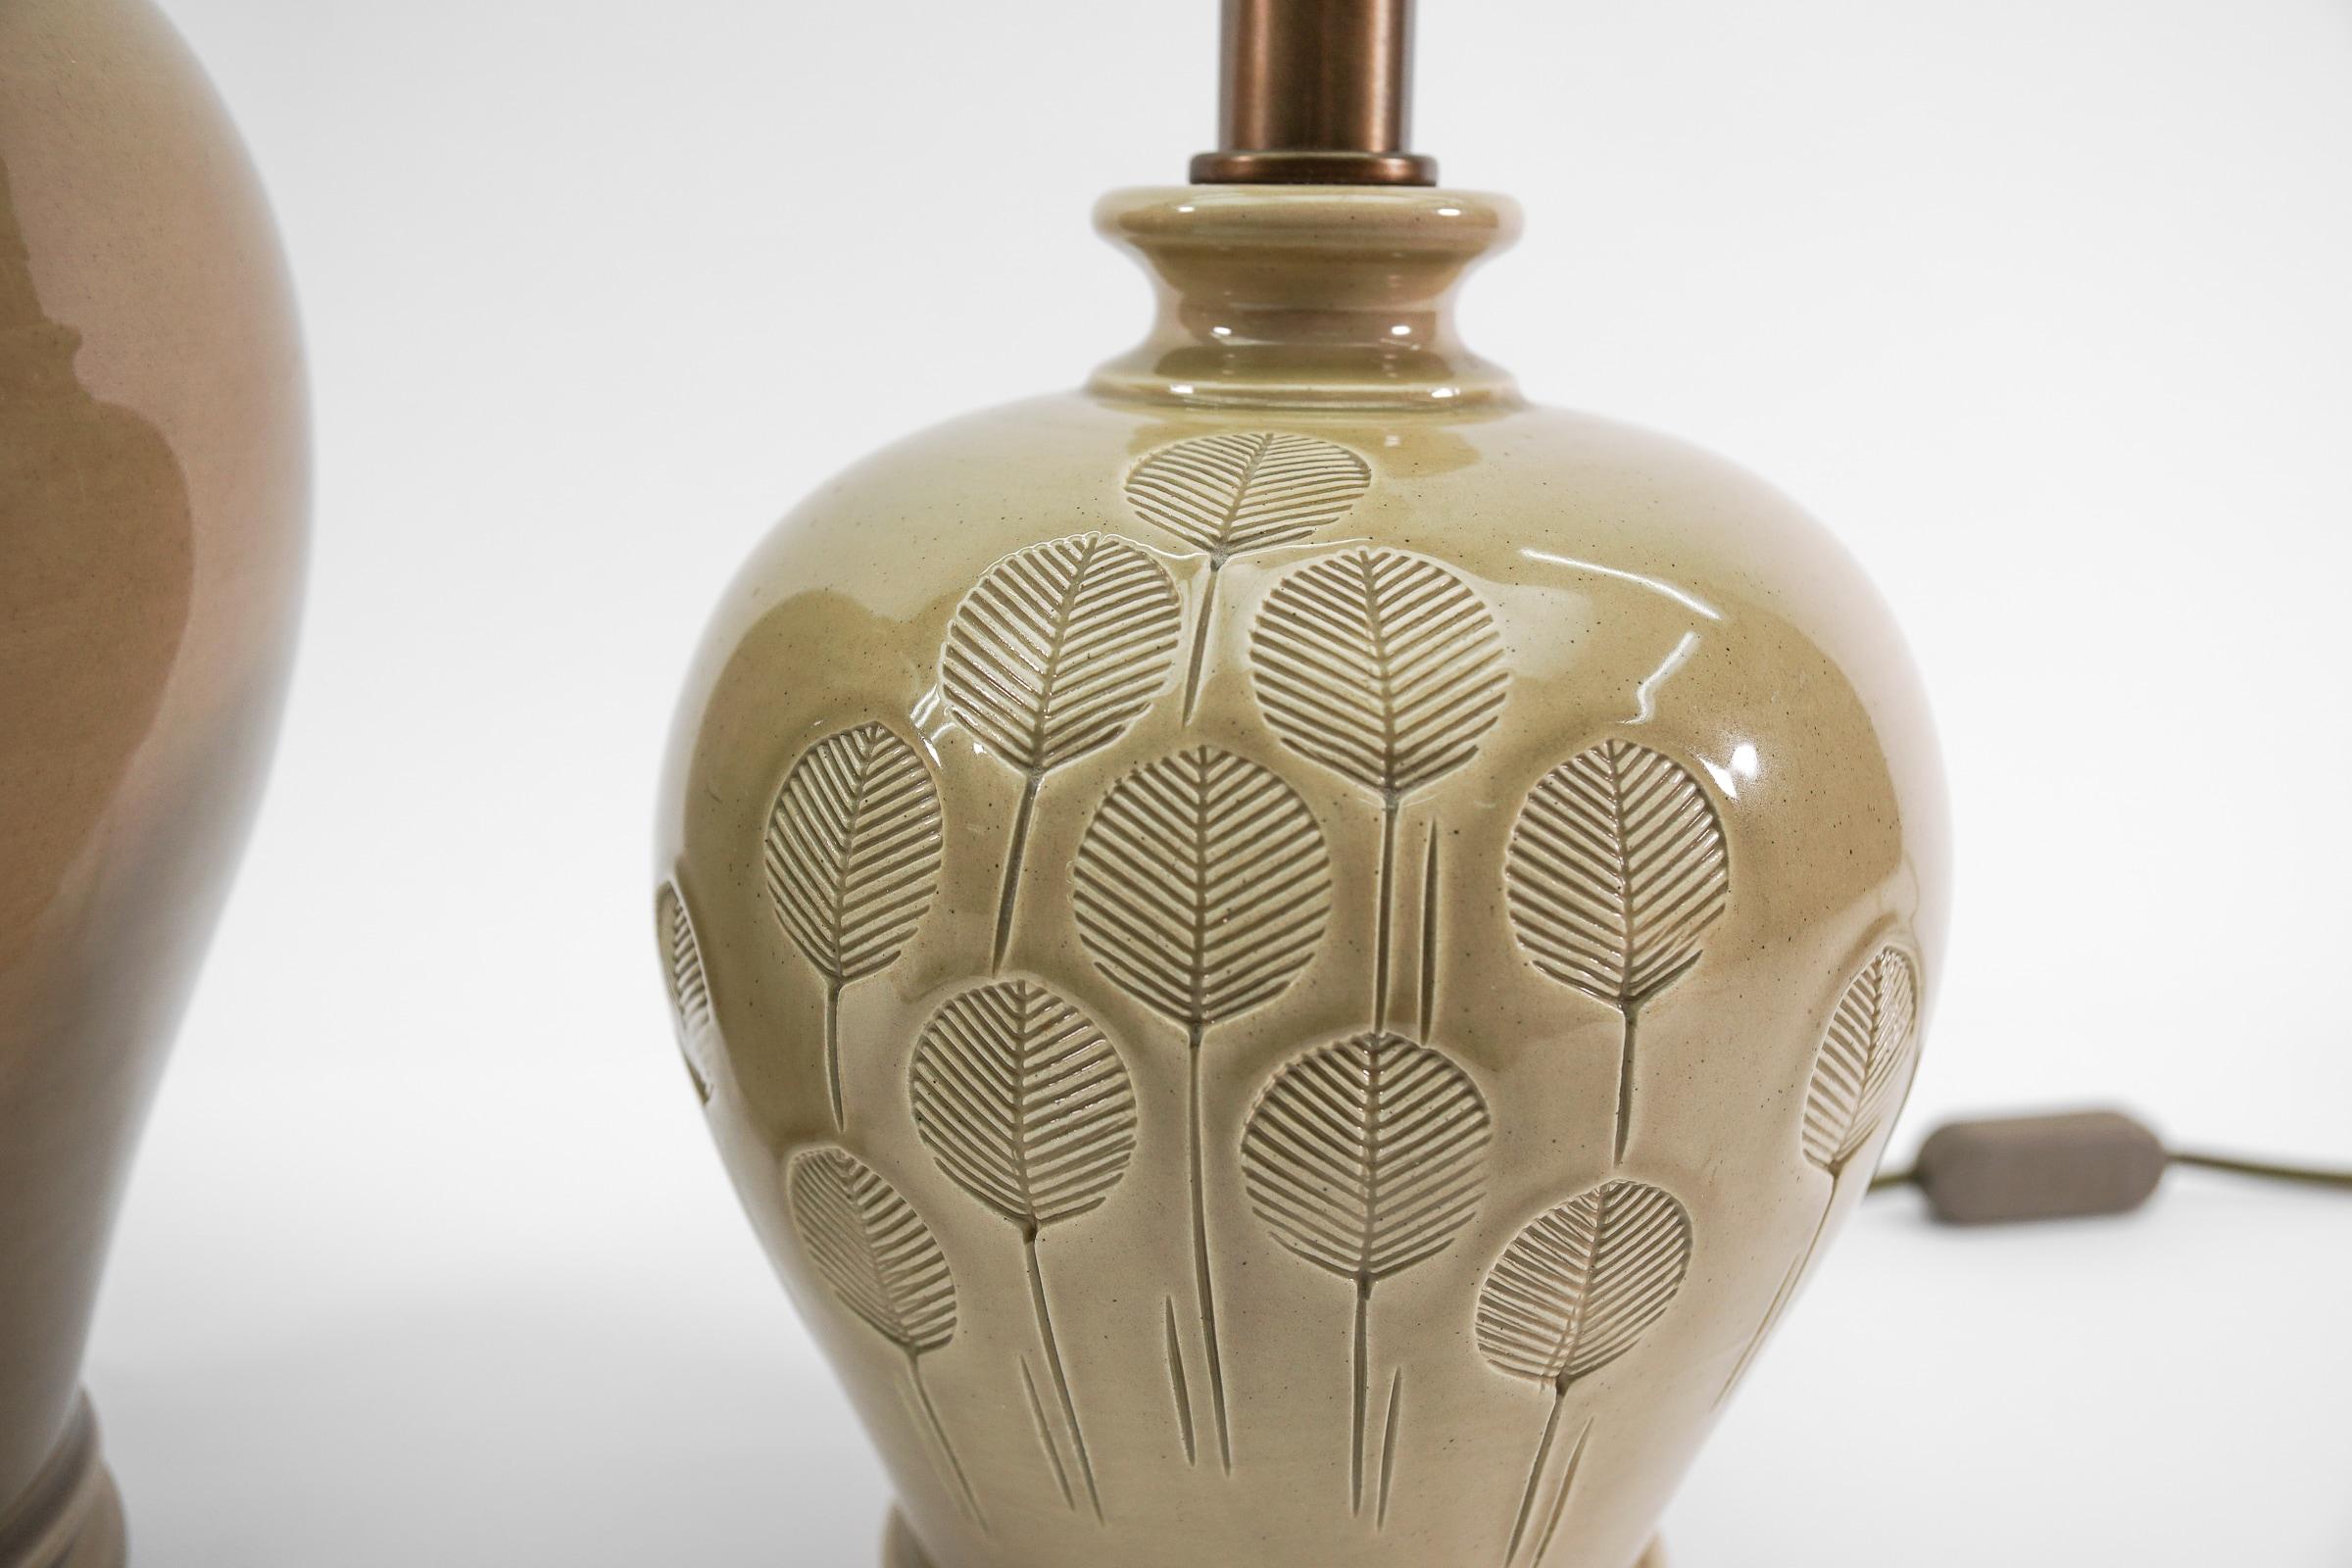 Two Scandinavian Ceramic Table Lamps with Great Leaf Pattern, 1960s For Sale 1